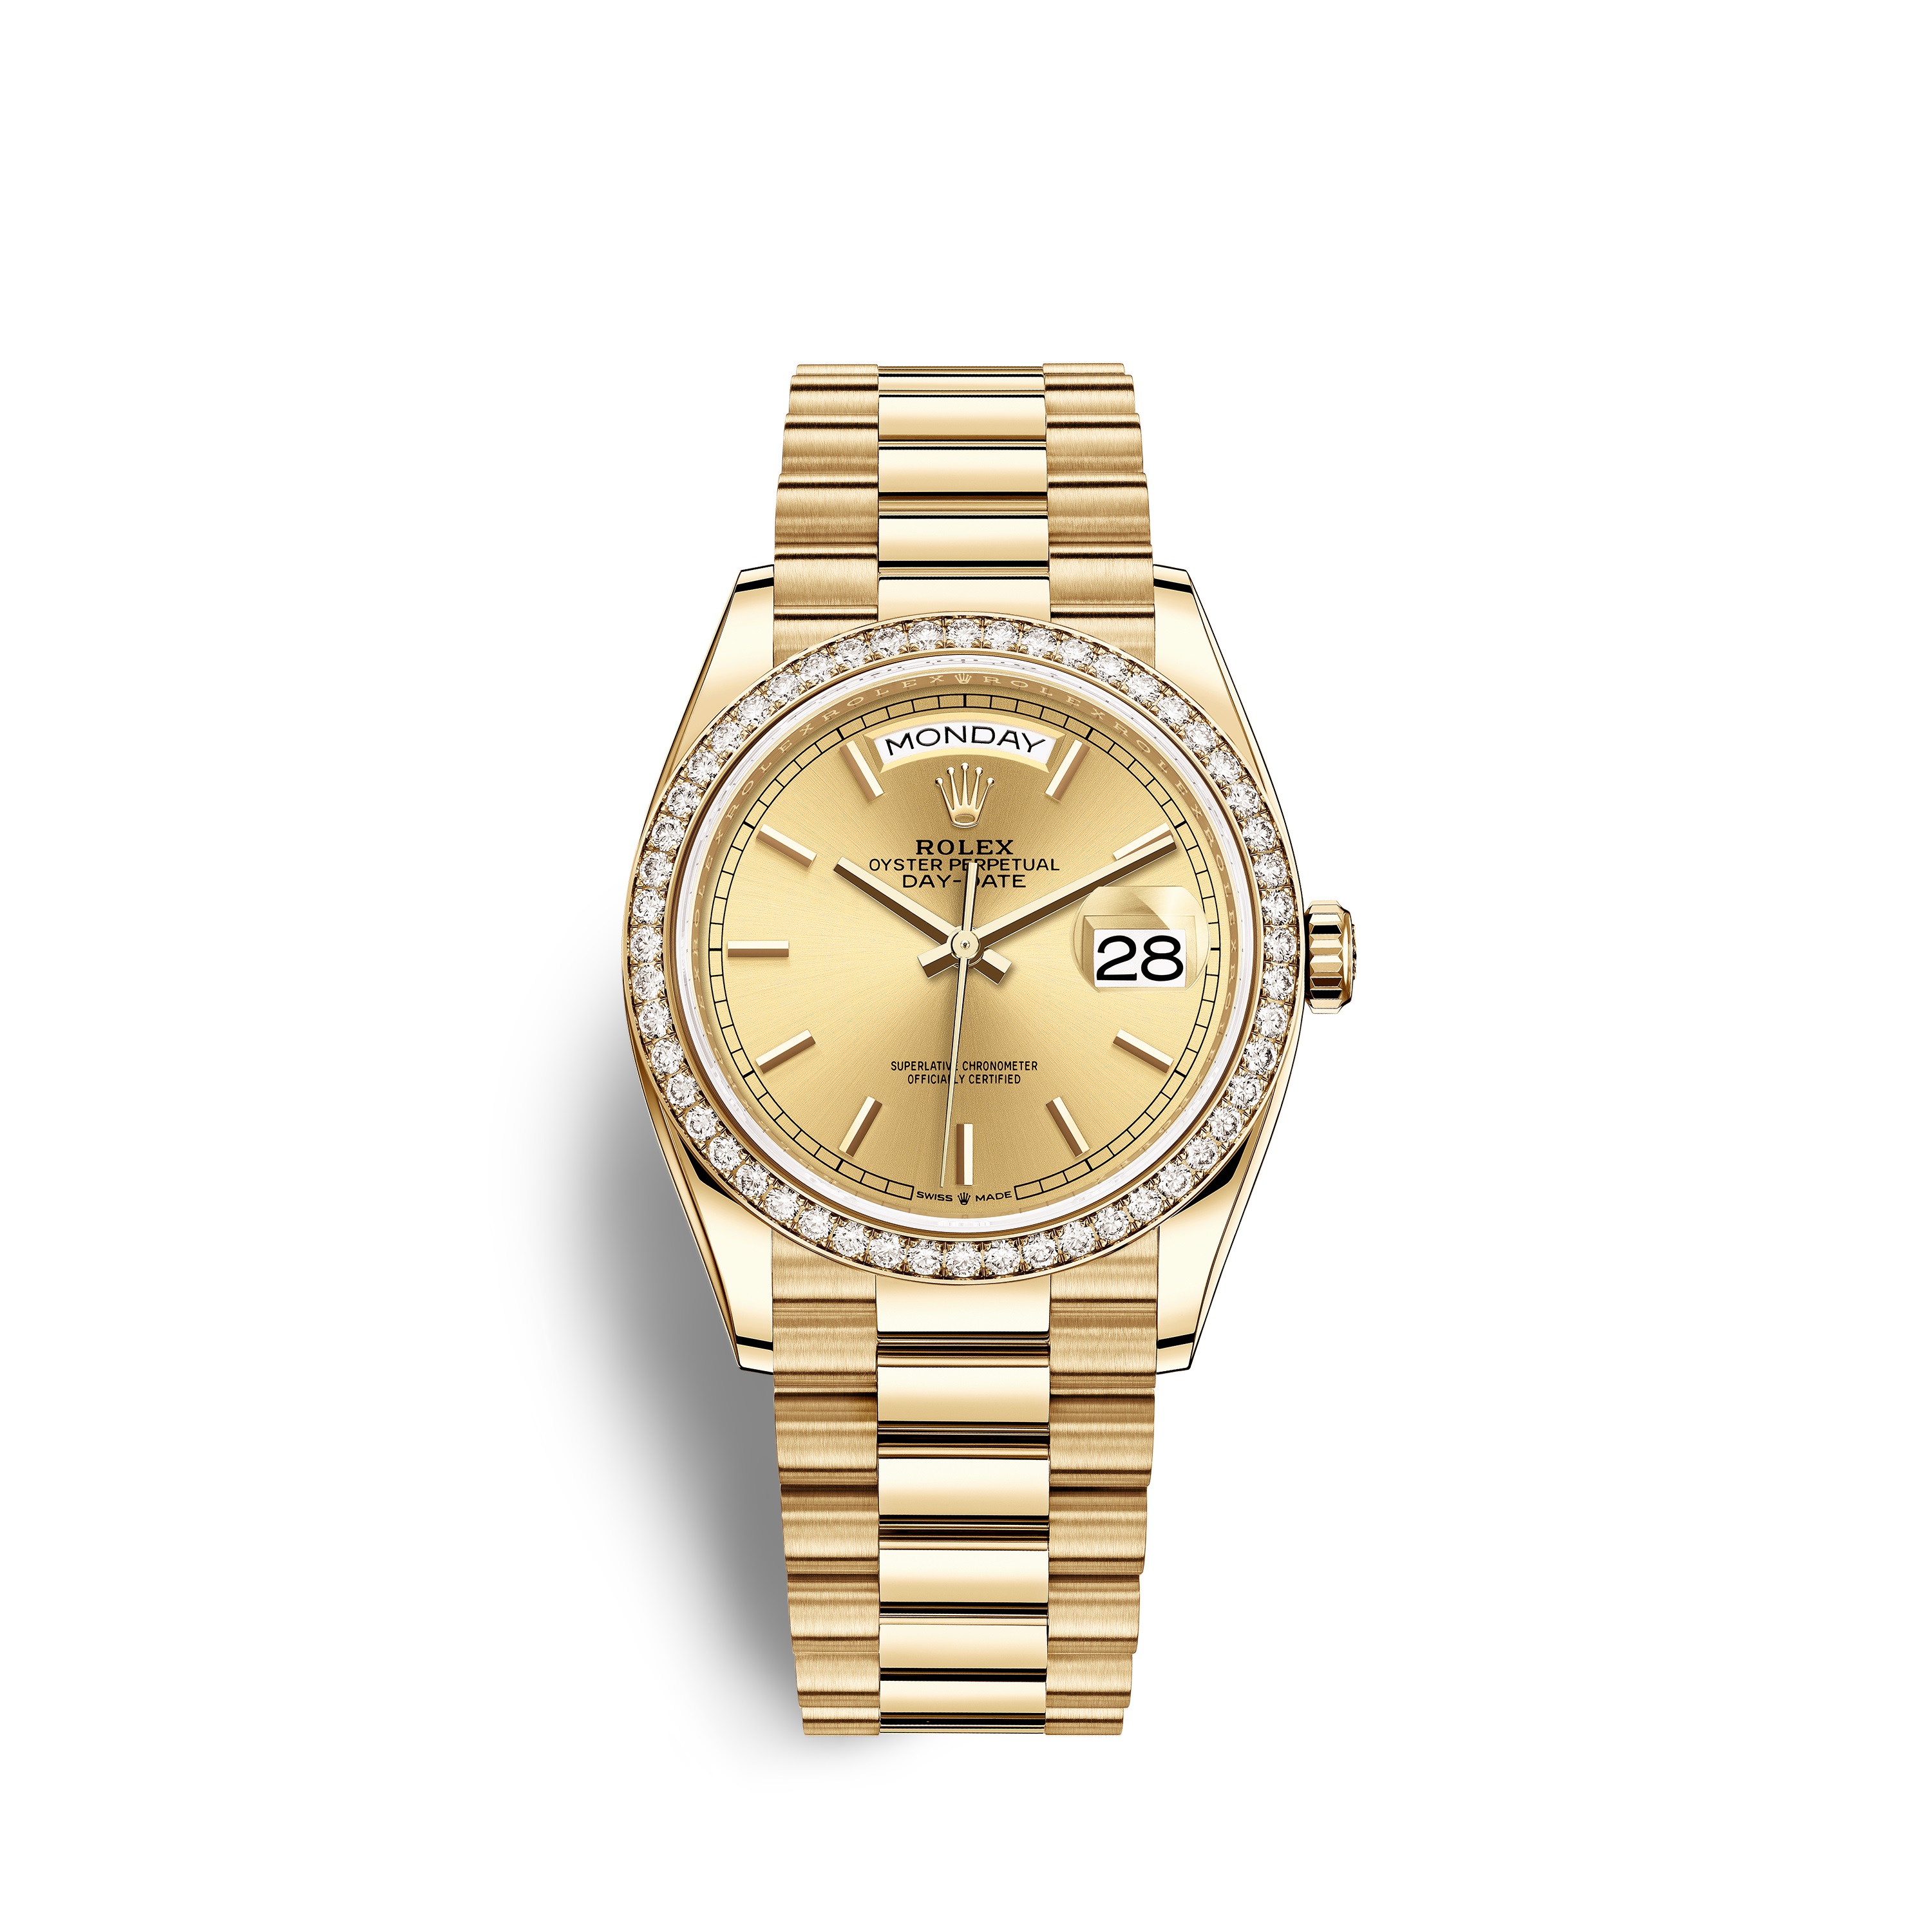 Day-Date 36 128348RBR Gold & Diamonds Watch (Champagne-Colour)